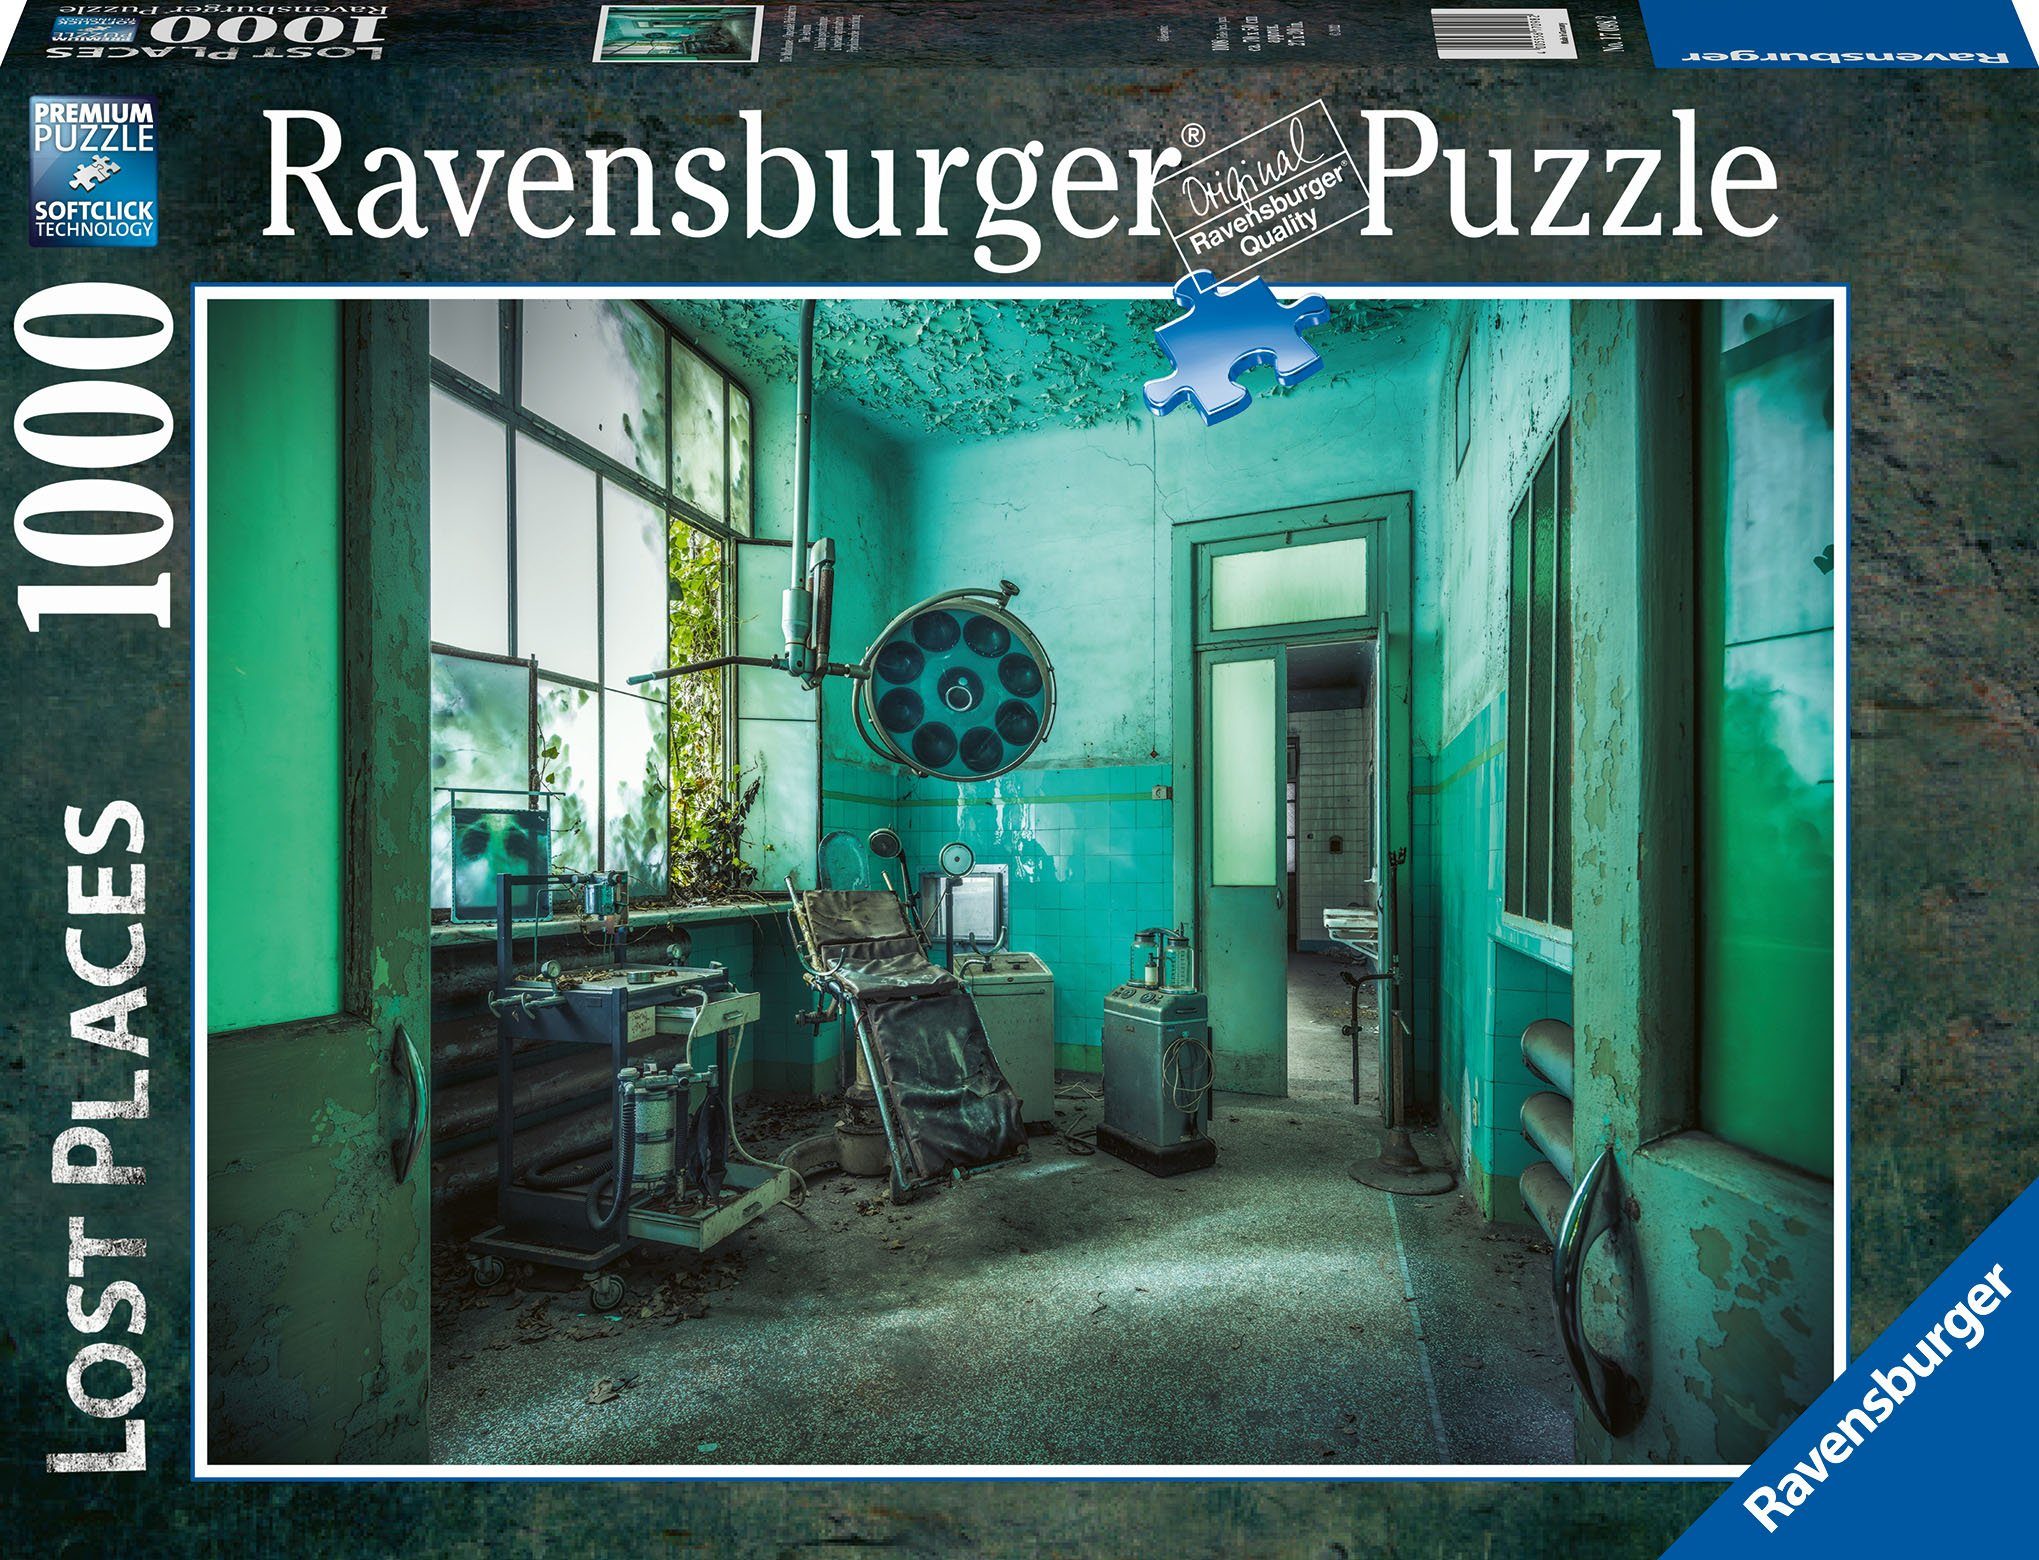 weltweit 1000 Ravensburger Puzzleteile, in Germany, Places, Made FSC® - Madhouse, Puzzle Wald - The Lost schützt